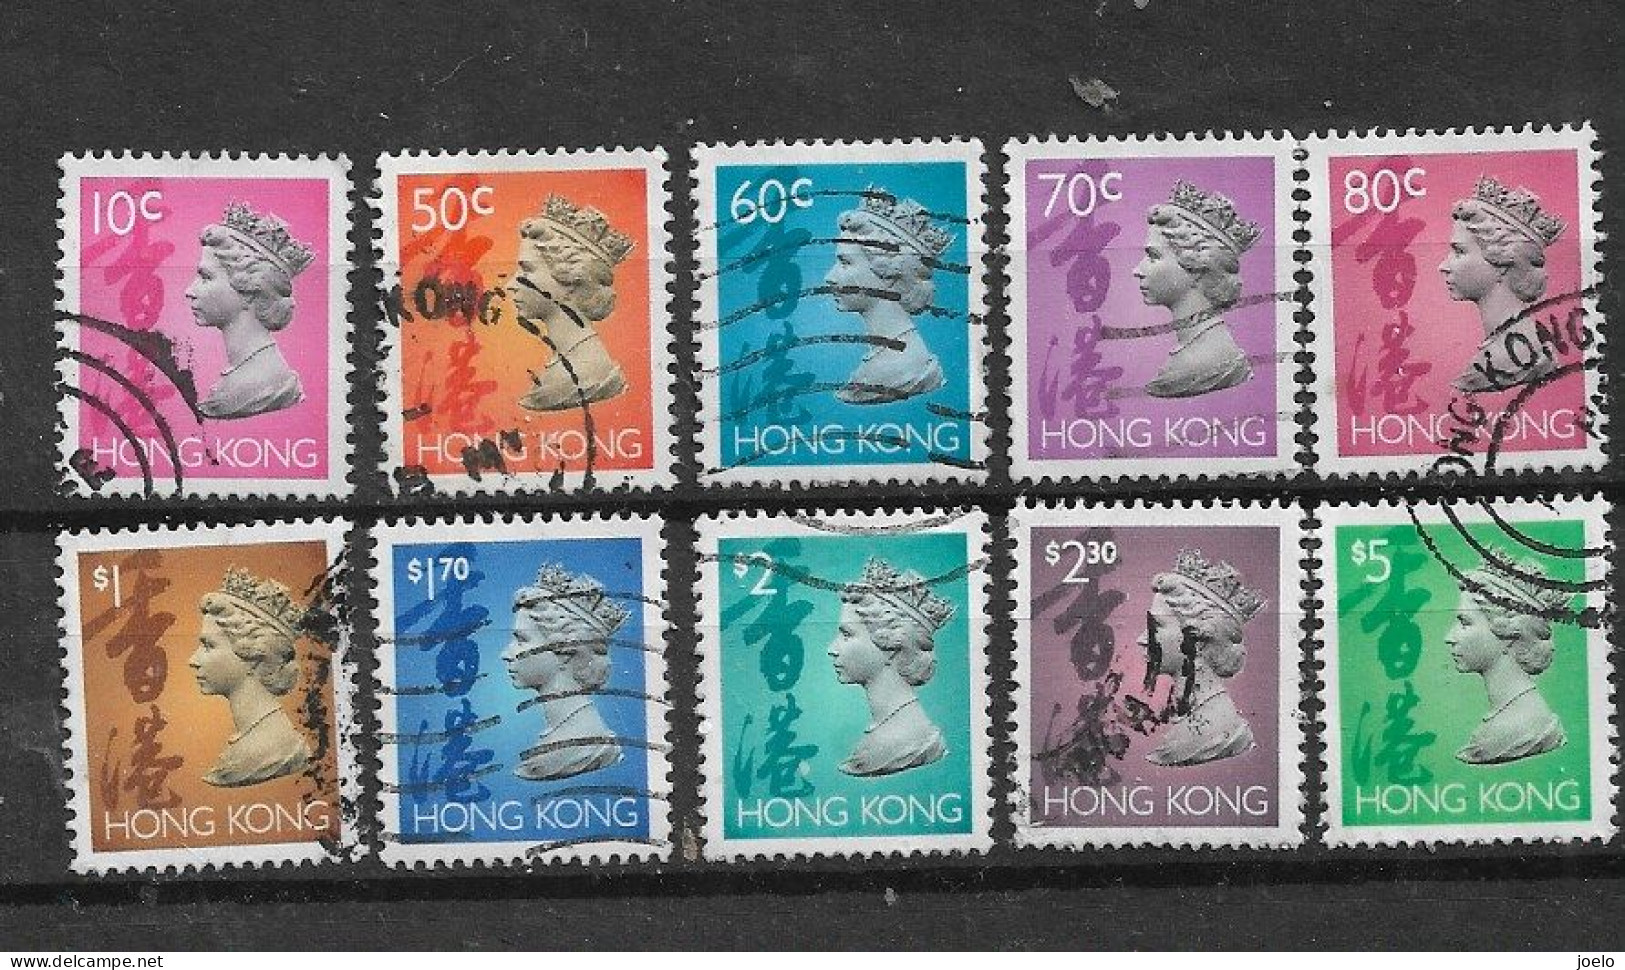 HONG KONG 1992 QE Ll DEFINITIVES  SELECTION TO $5 - Used Stamps